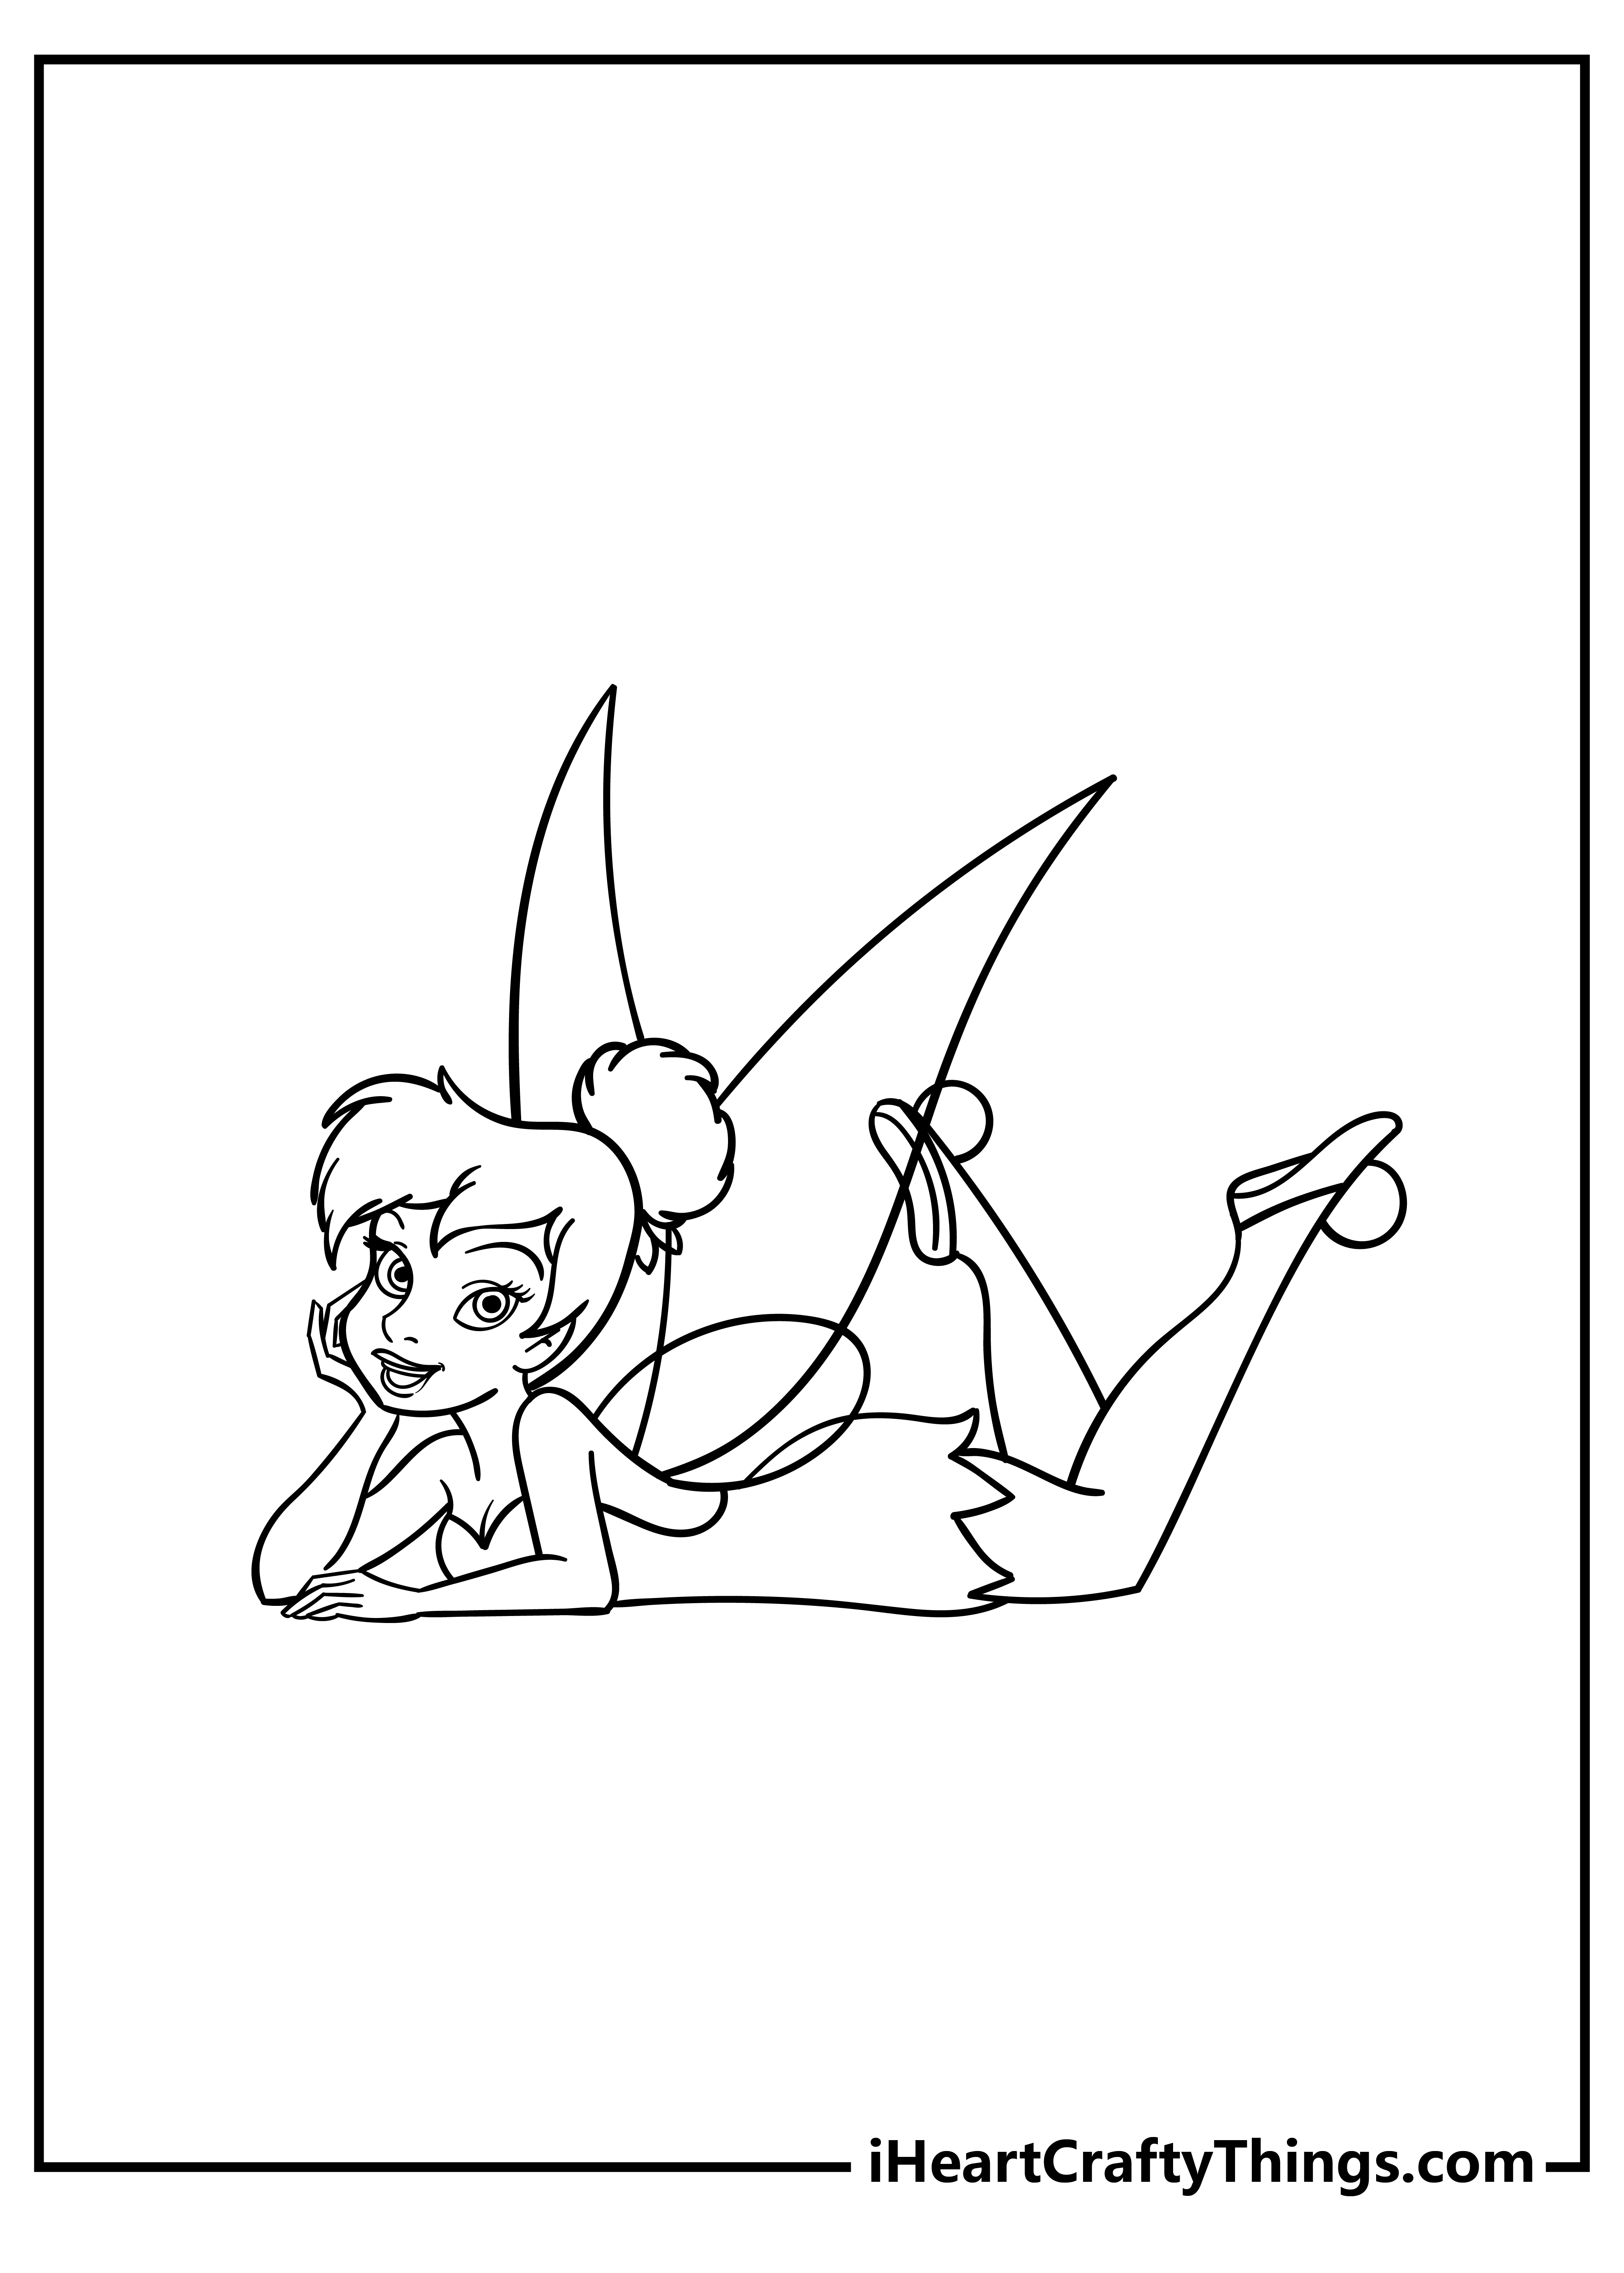 Printable Tinkerbell Coloring Pages Updated 21